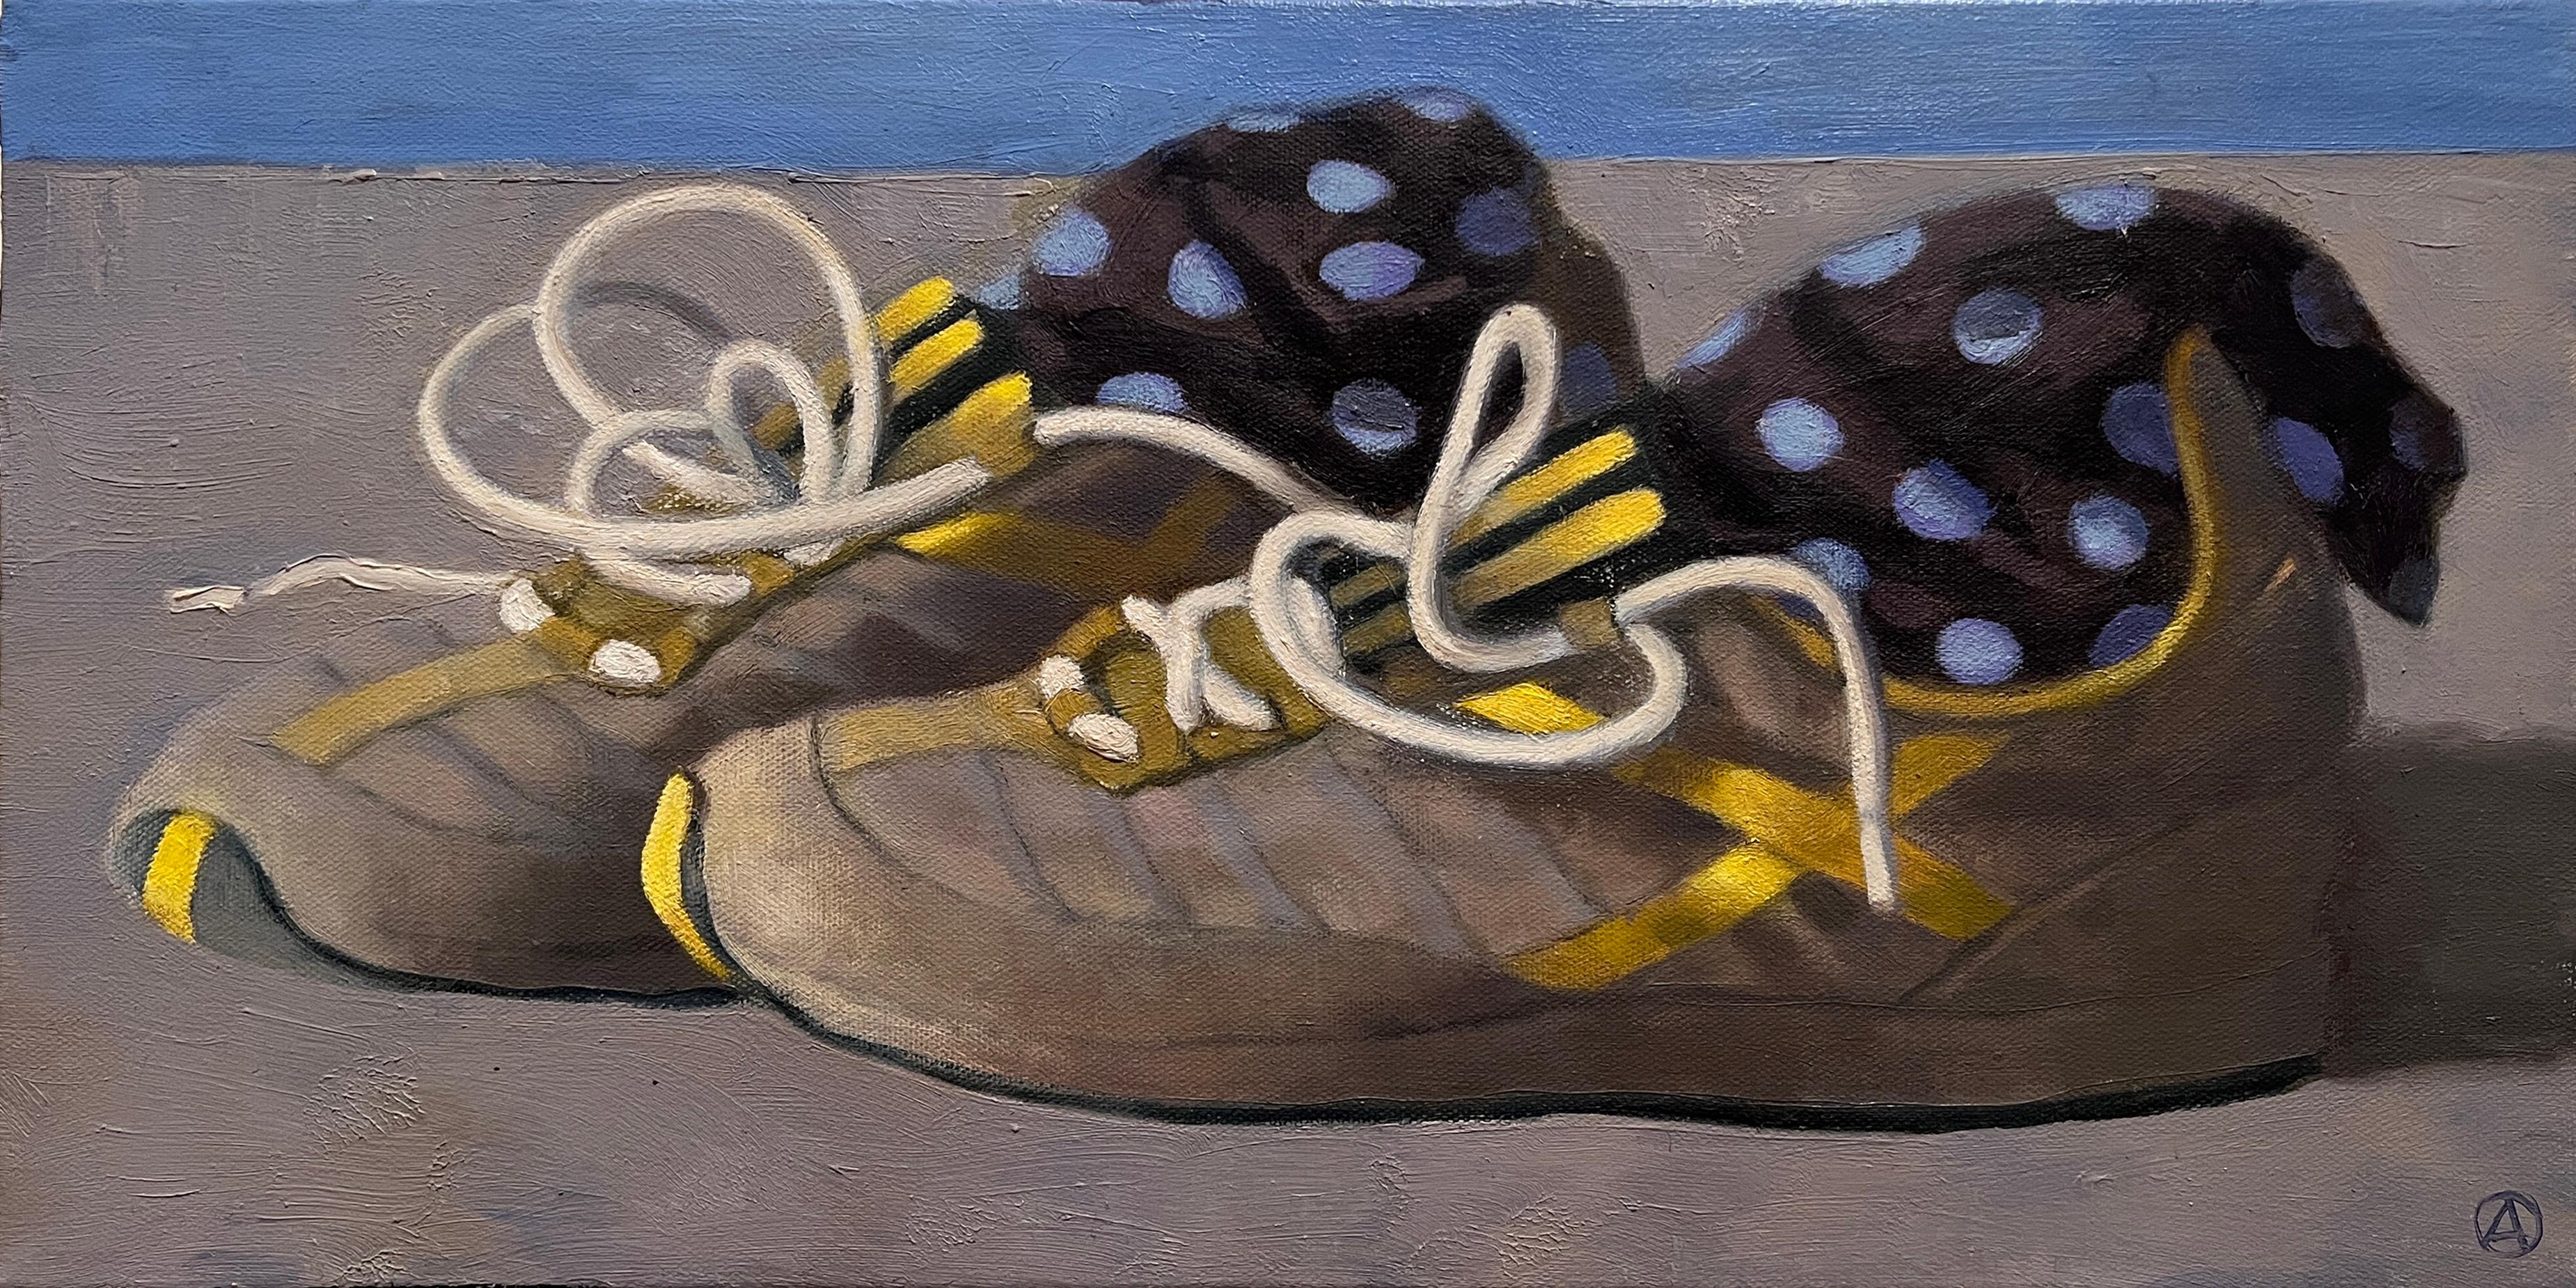 SHOES WITH POLKA DOT SOCKS - Contemporary Still Life / Traditional Realism